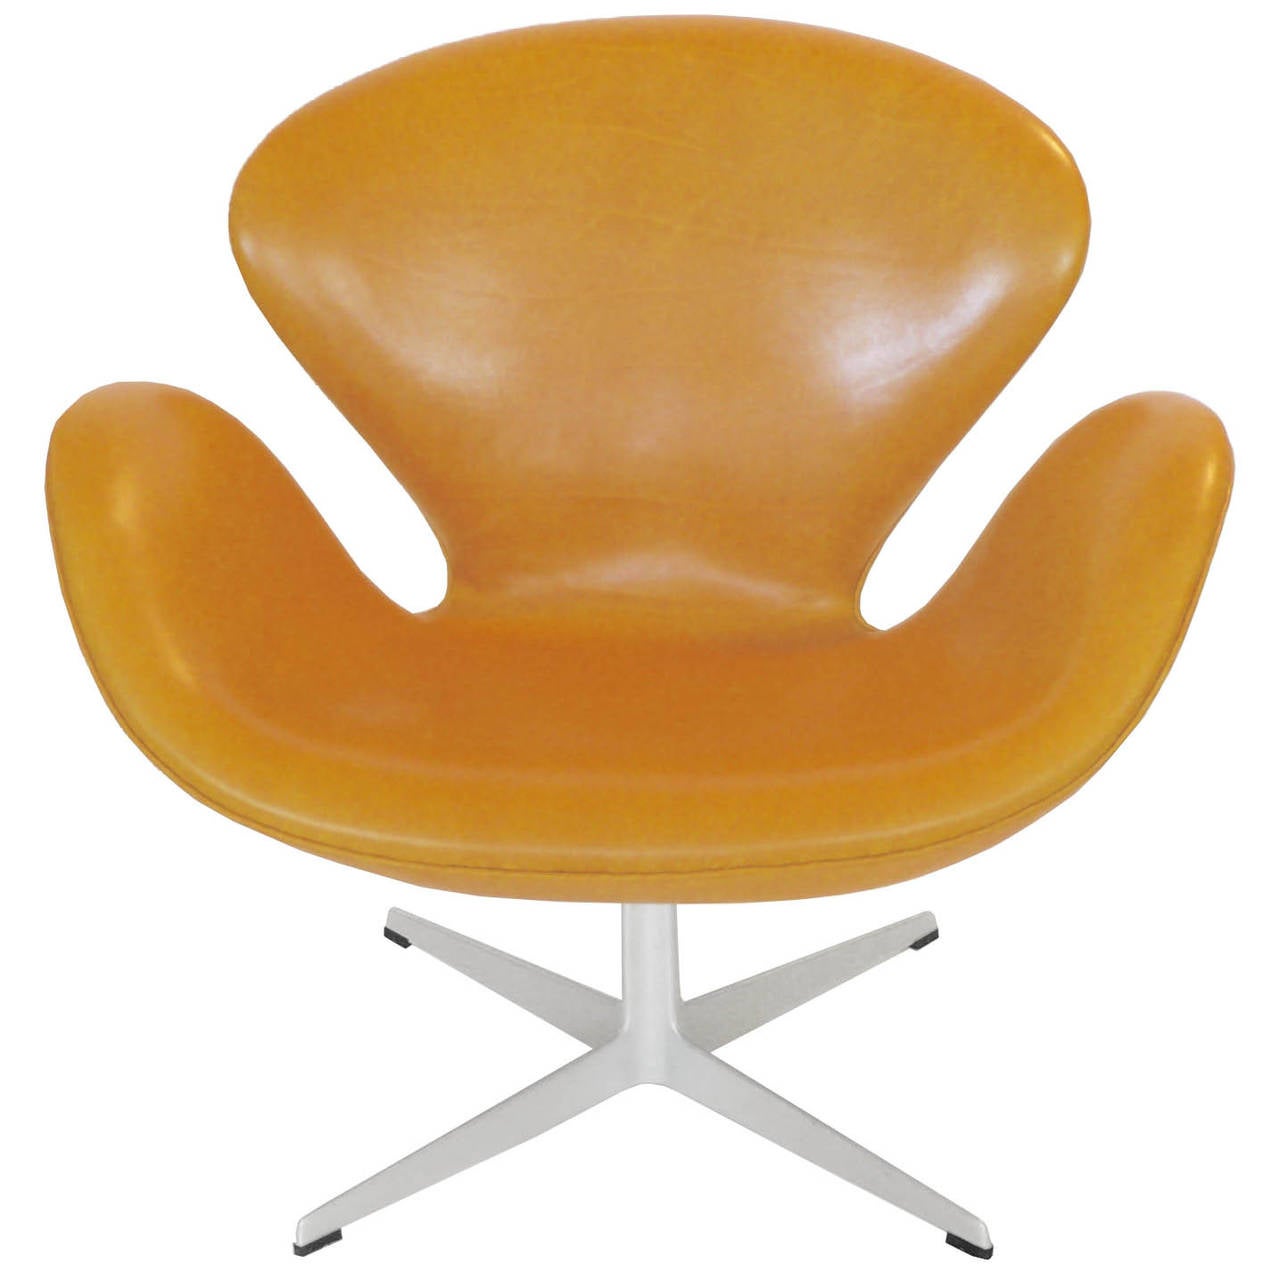 Mid-Century Modern Pair of Original Swan Chairs by Arne Jacobsen for Fritz Hansen For Sale